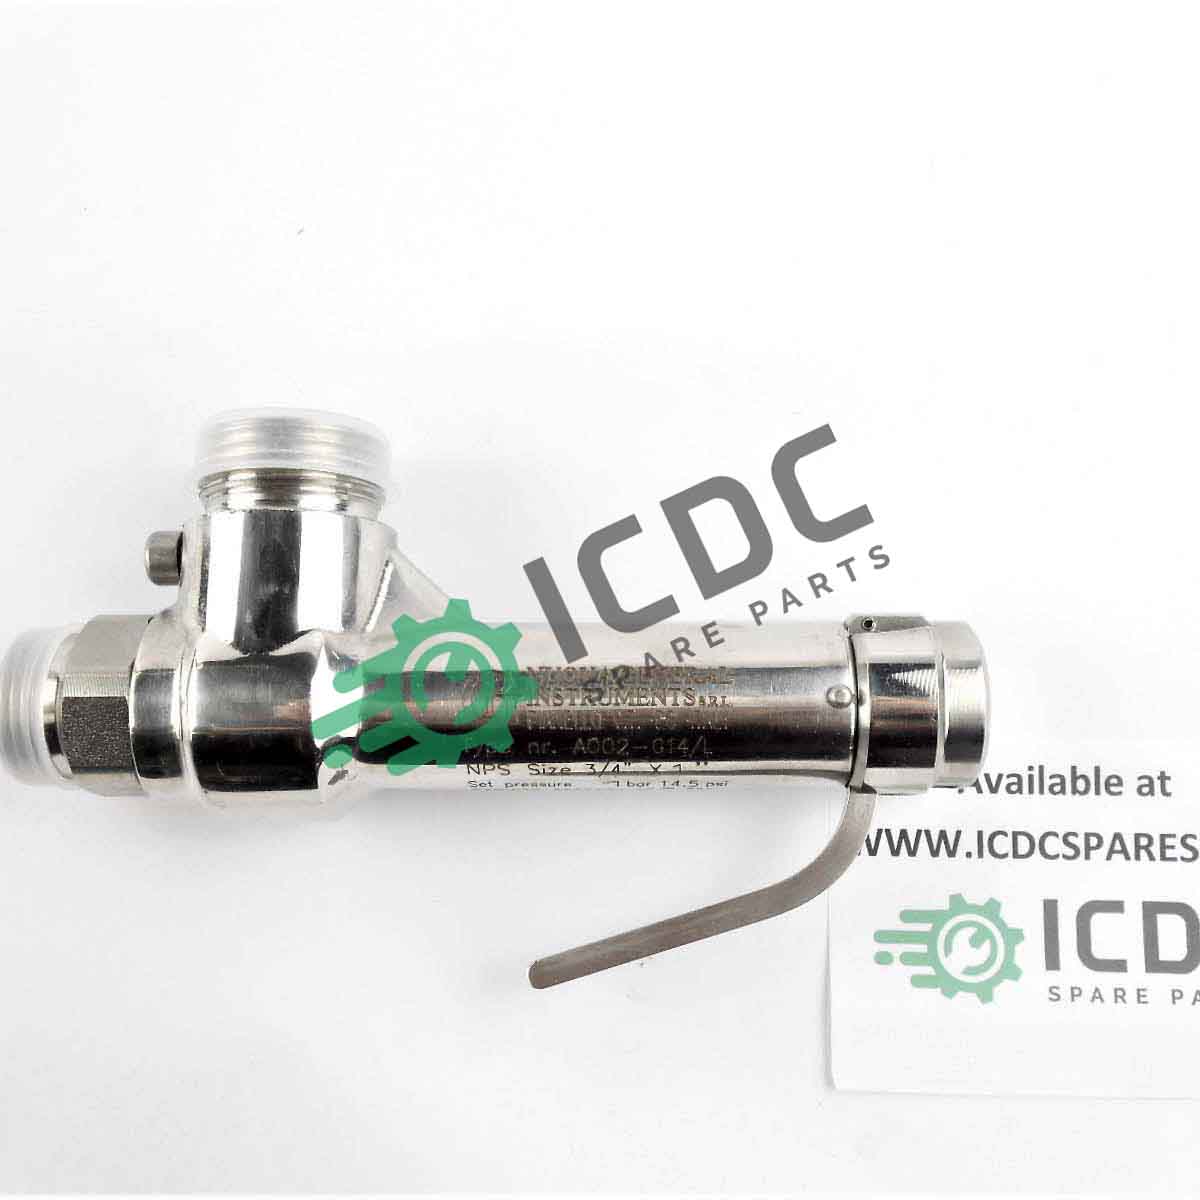 Secondly Draw a picture Peck NUOVA GENERAL INSTRUMENTS - A002-G14/L - Valve | Contact ICDC!